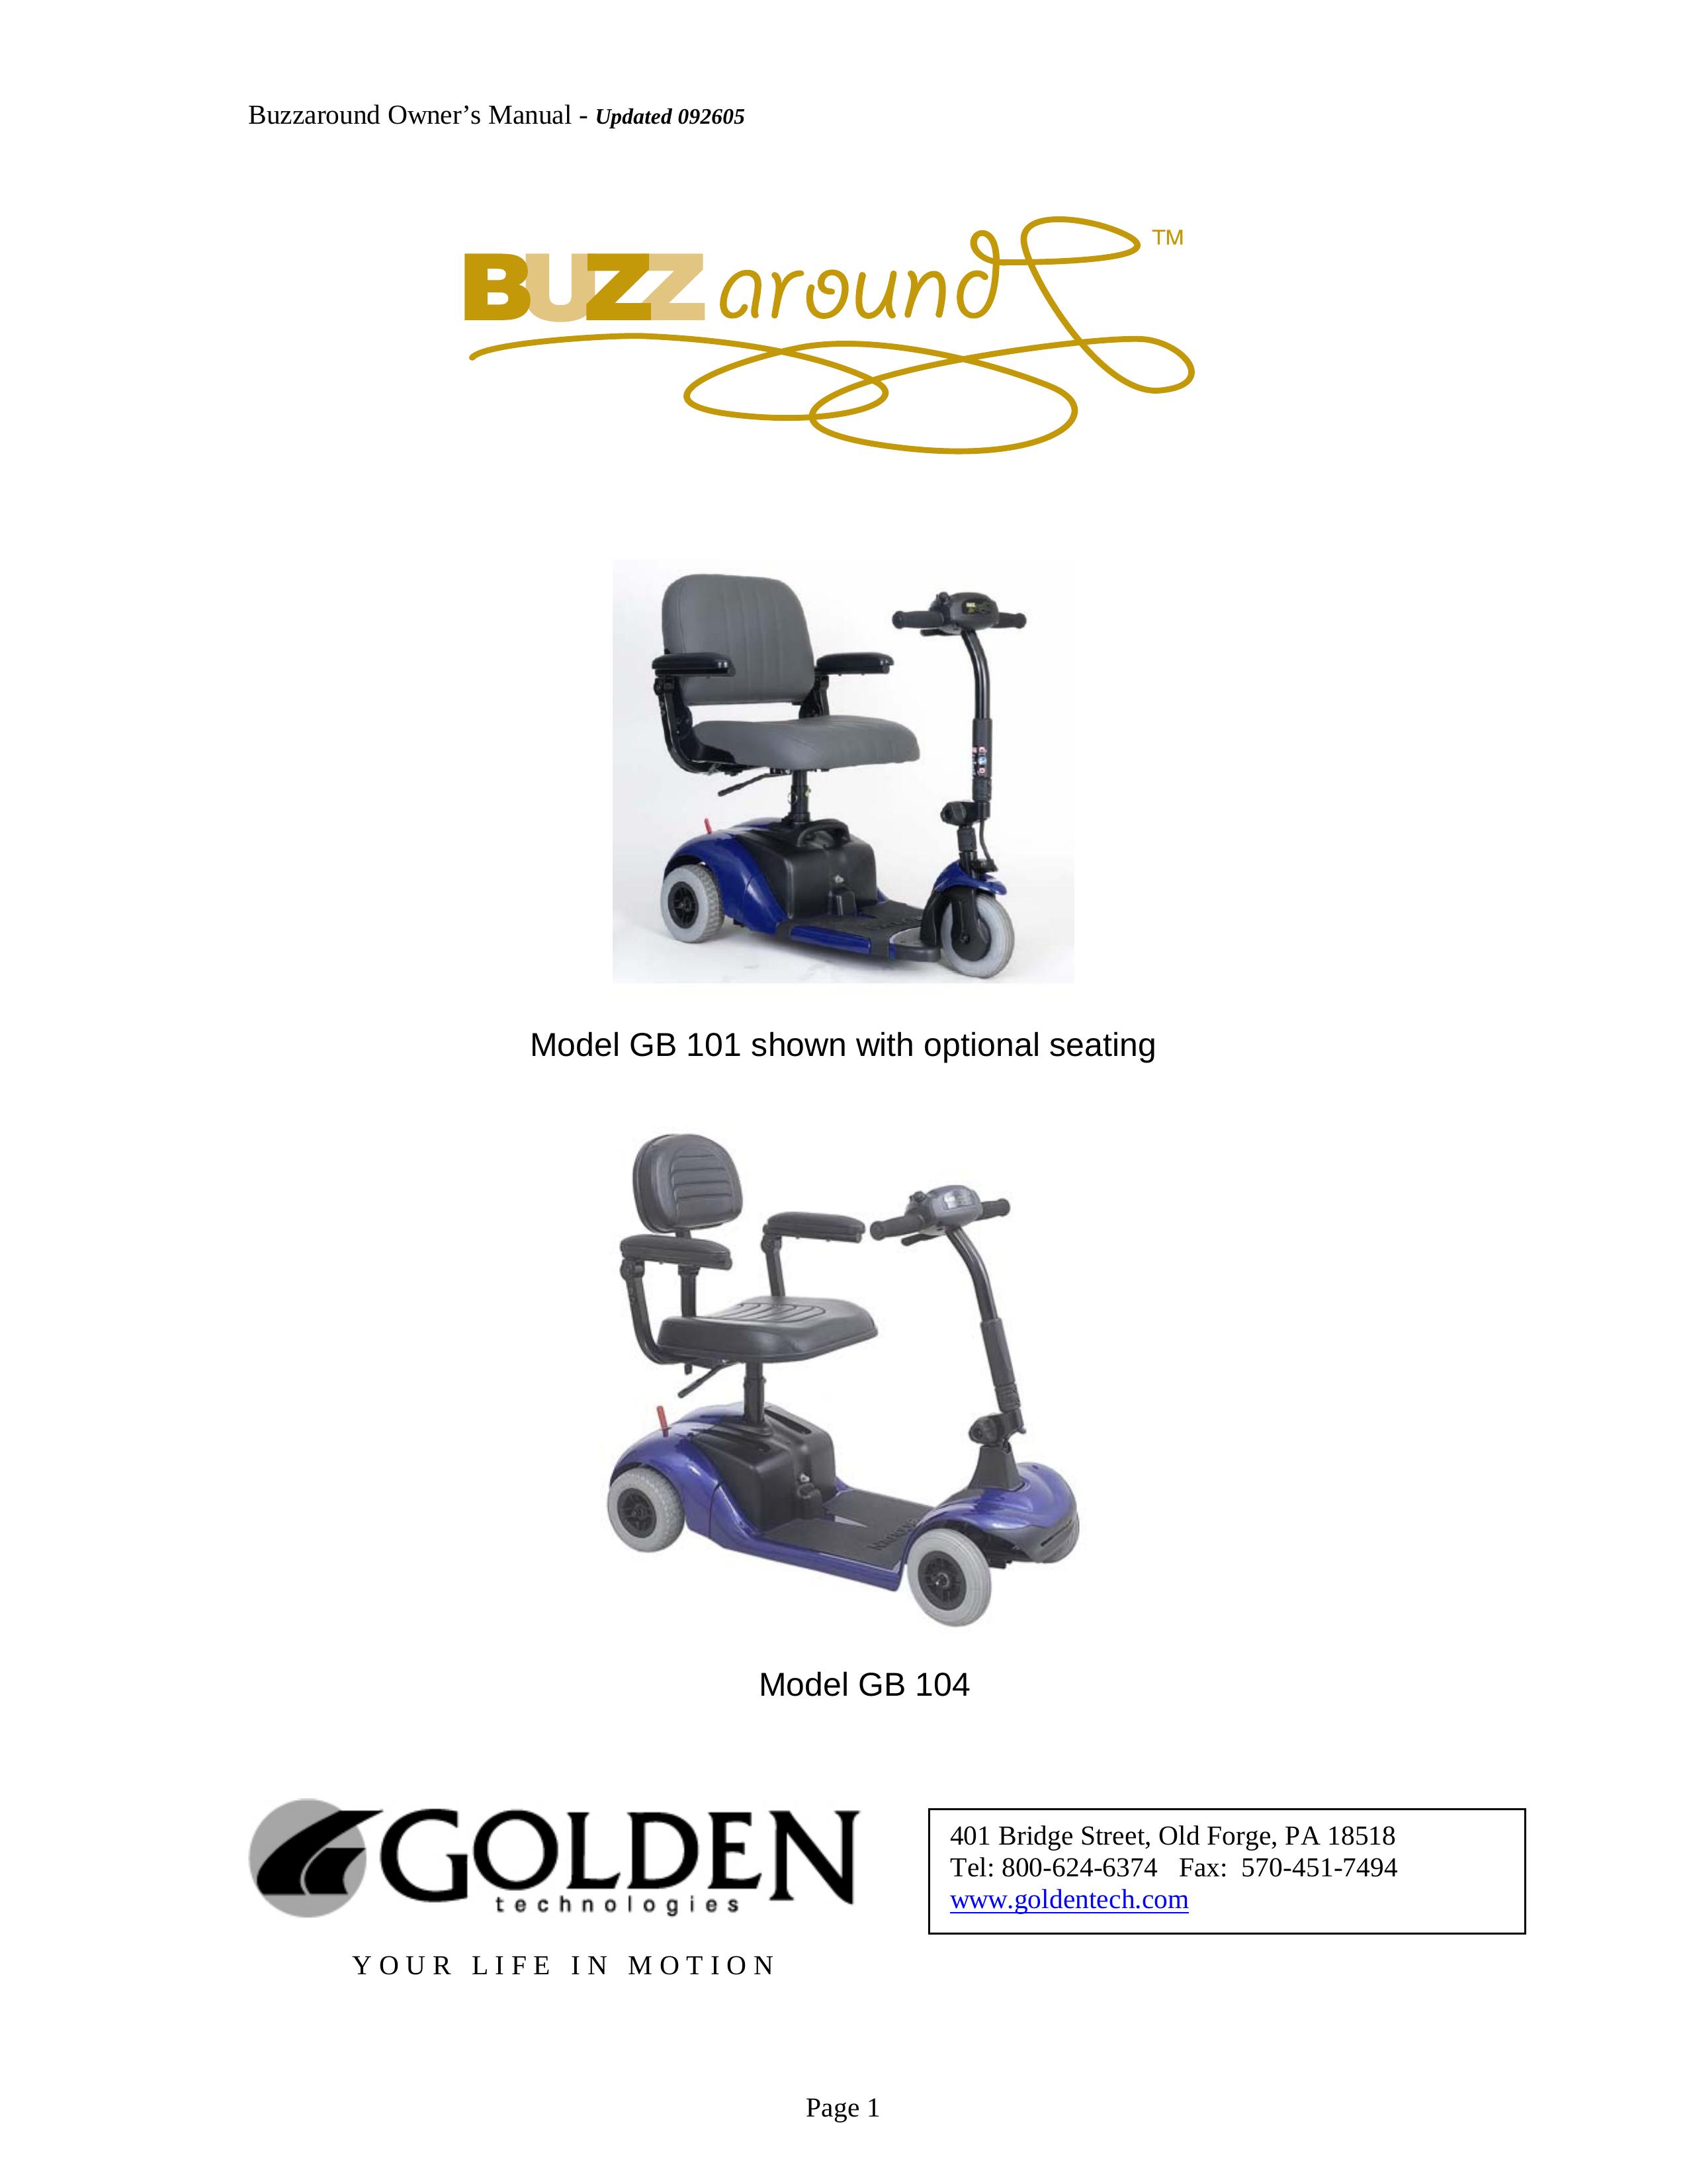 Golden Technologies GB 101 Mobility Aid User Manual